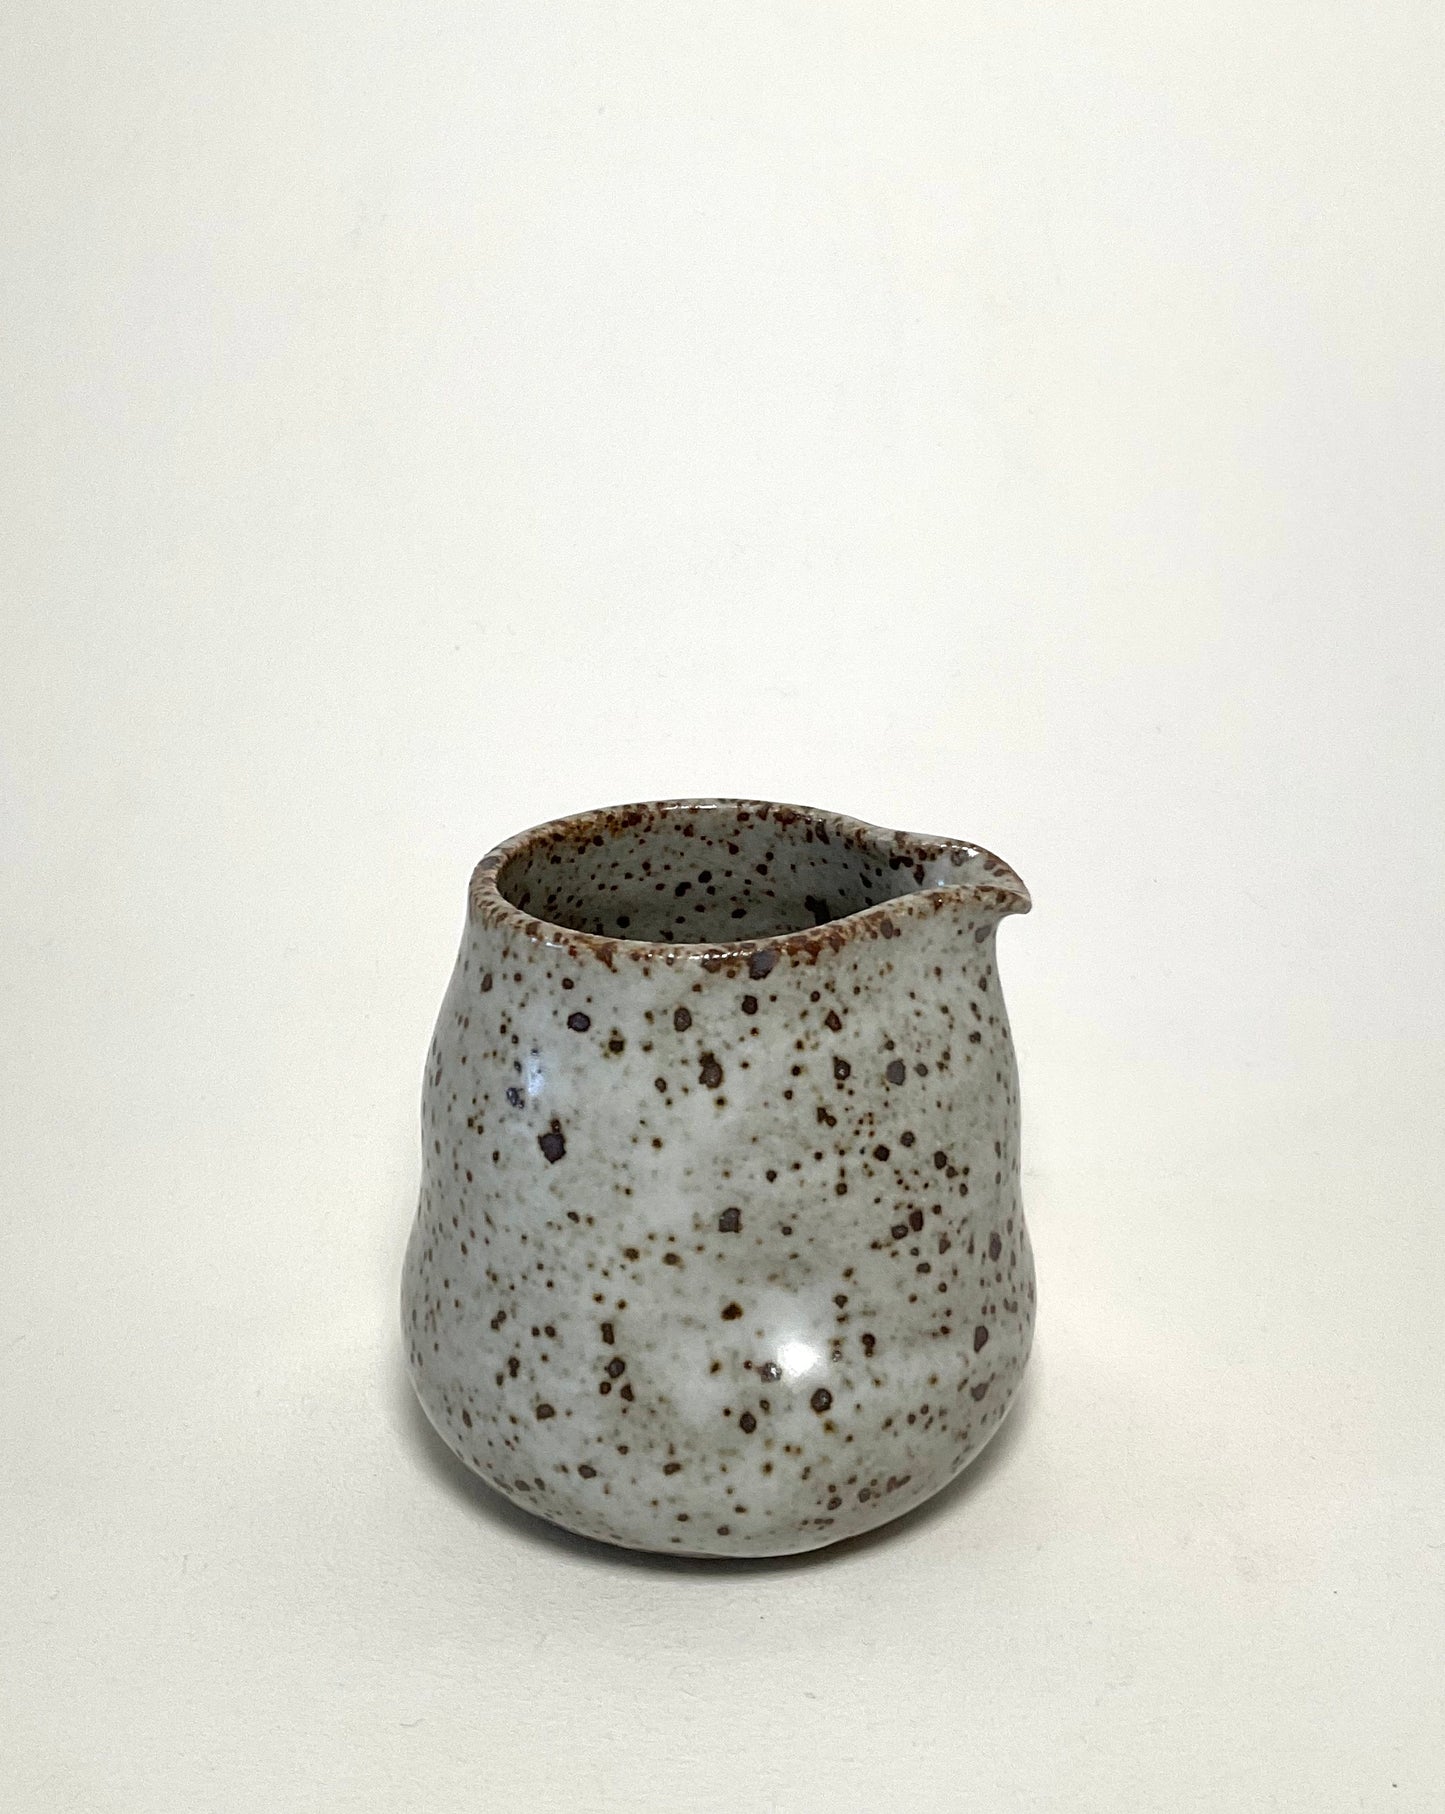 Reduction Fired Pouring Bird.